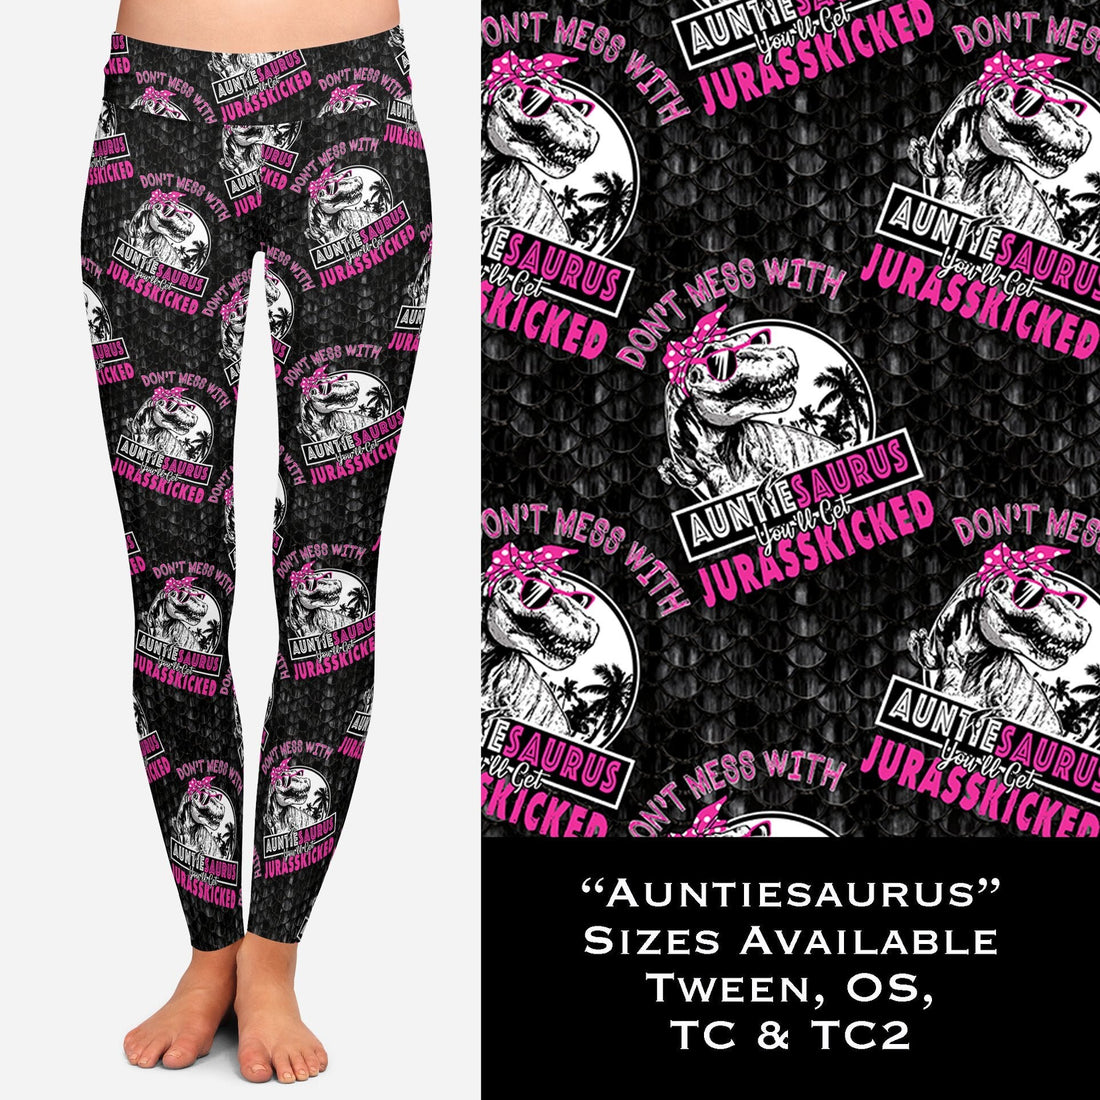 Don't Mess With Mamasaurus You'll Get Jurasskicked Print Capri Leggings